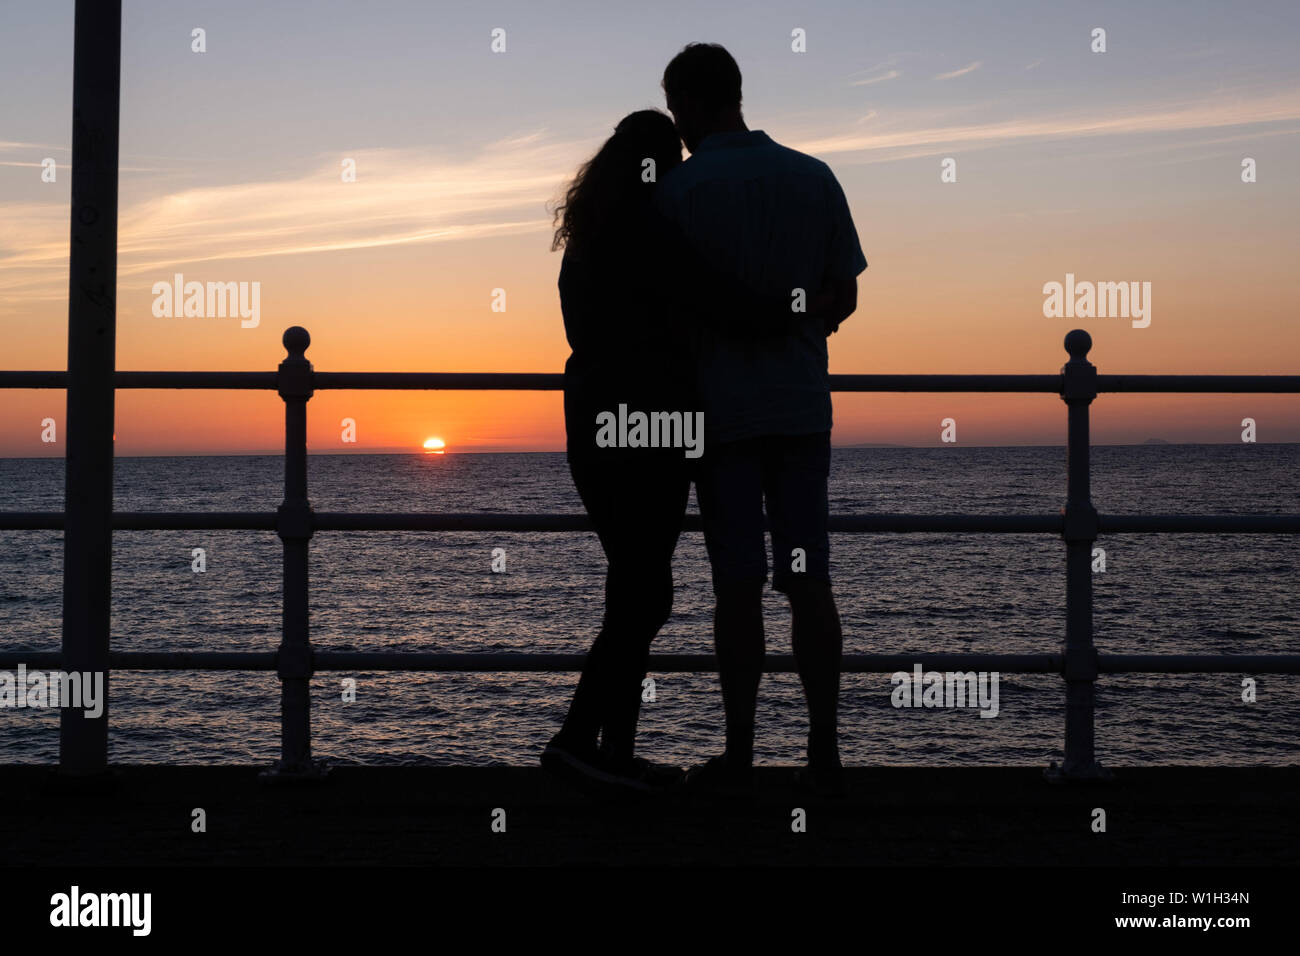 Aberystwyth Wales UK, Tuesday 02 July 2019  UK Weather: A couple embrace, silhouetted against the sky as they watch the glorious sunset in Aberystwyth on the Cardigan Bay coast, west Wales.   photo credit: Keith Morris//Alamy Live News Stock Photo